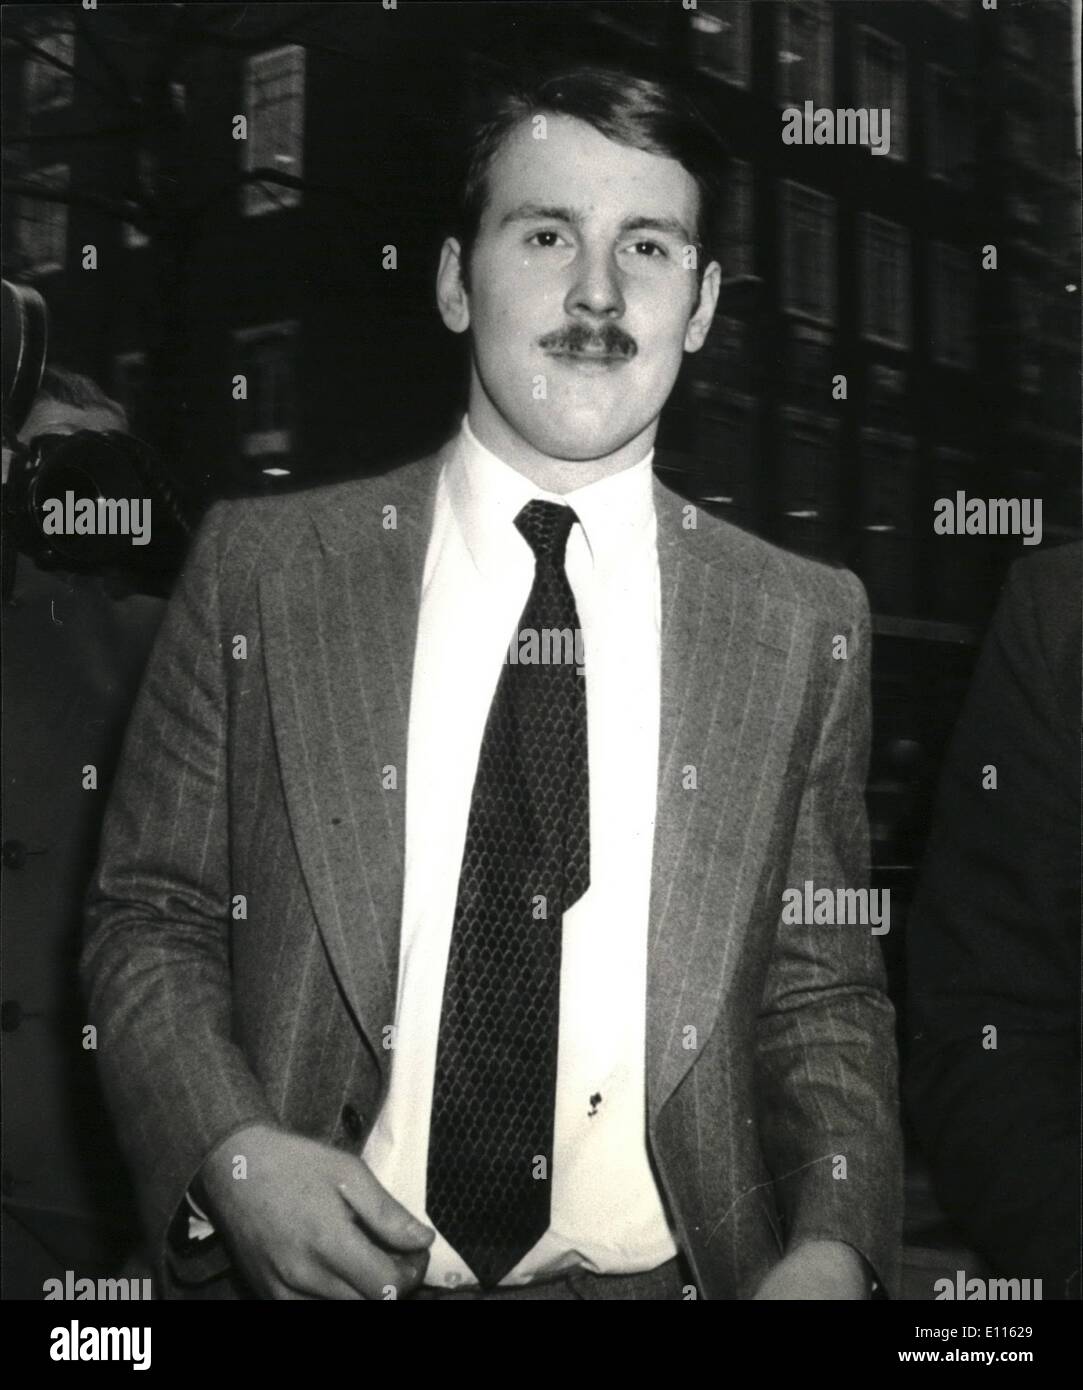 Feb. 02, 1976 - Maudling's Son appears at London Court on a theft charge: Edward Maudling, the 21-year-old son of Reginald Maudling, the former Home Secretary, appeared at a London Court this morning to face a shop where he stealing 75 worth of wine from a shop where he worked as assistant manager until last month. Photo shows Edward Maudling leaving the court this morning after being given a conditional discharge. Stock Photo